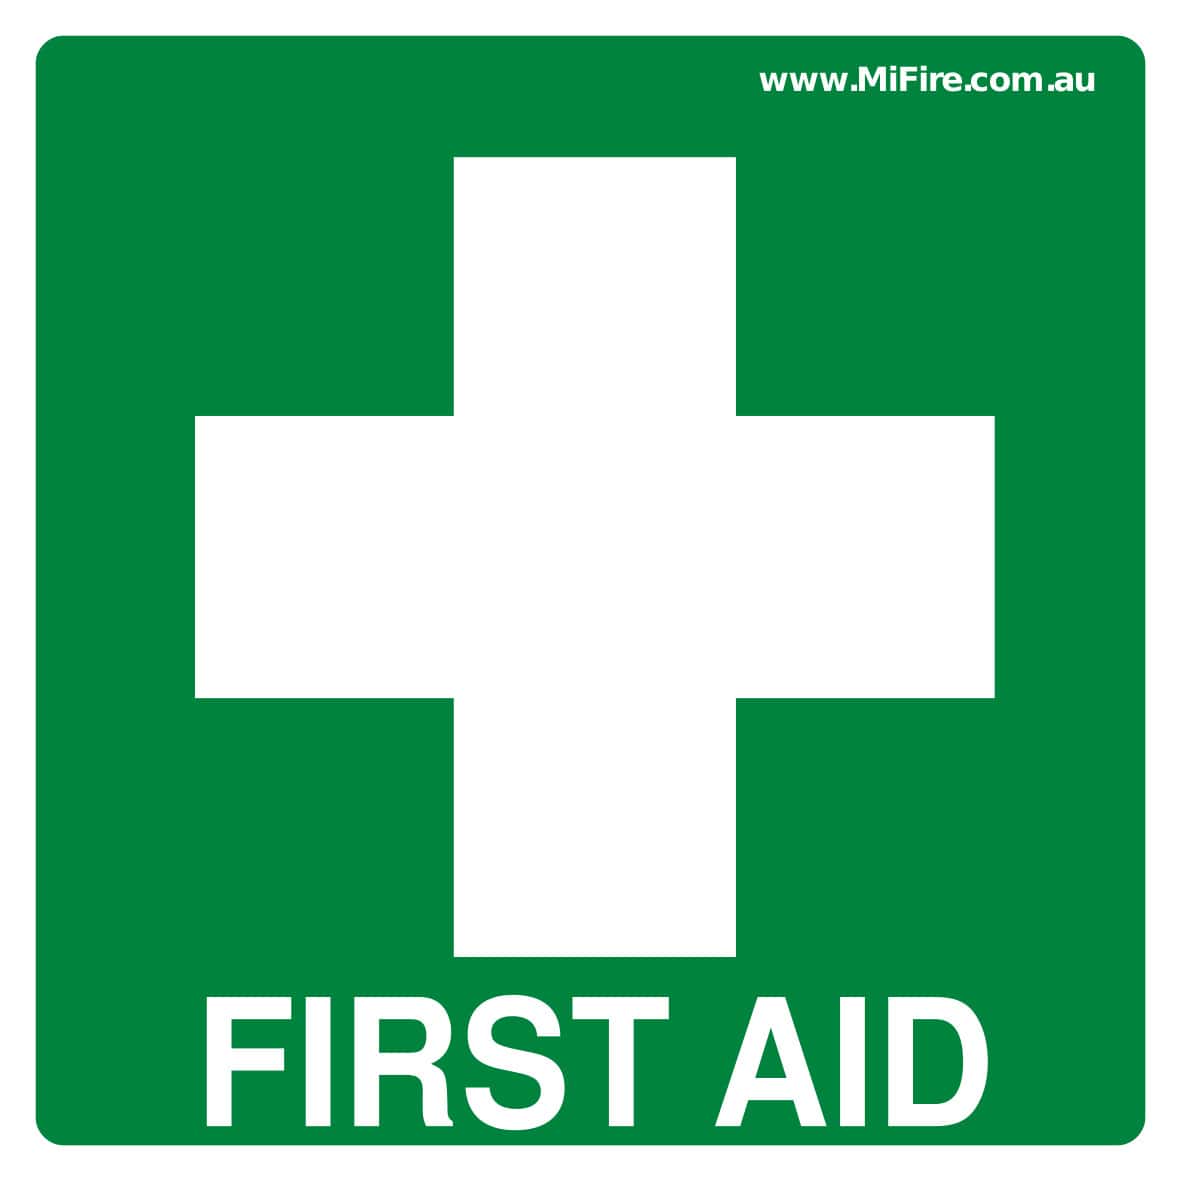 MiFire first aid sign 100mm x 100mm